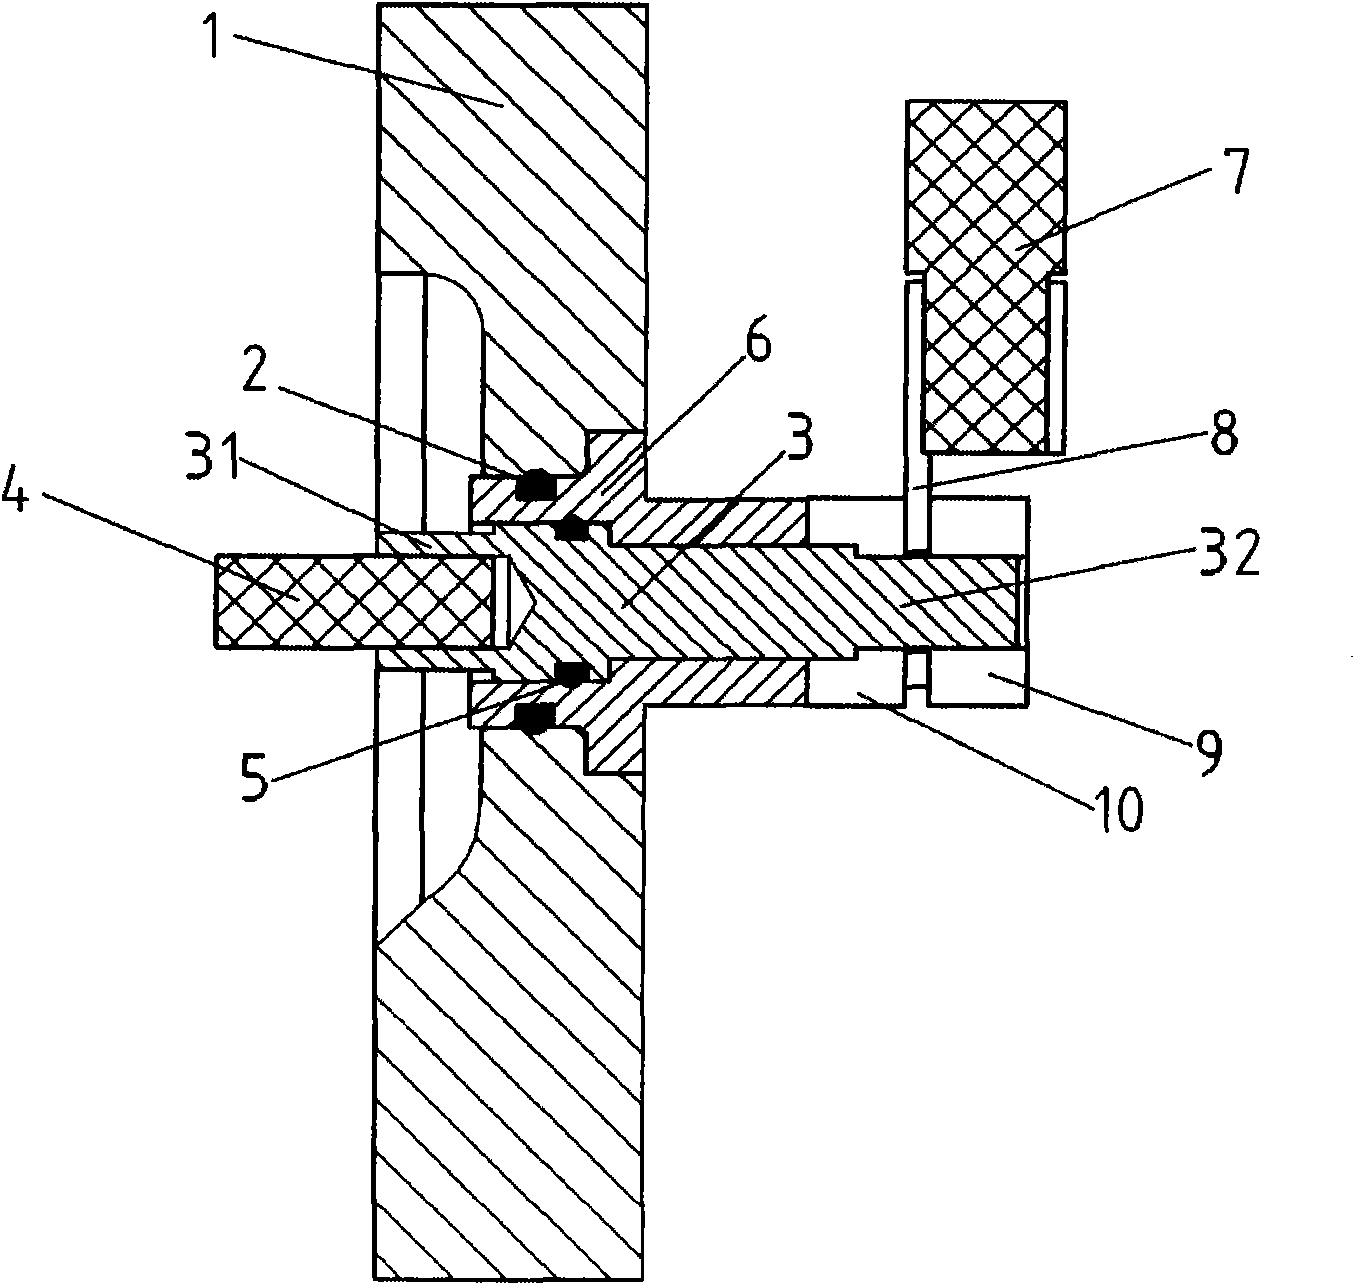 Outlet structure of power line for driving motor of electric vehicle